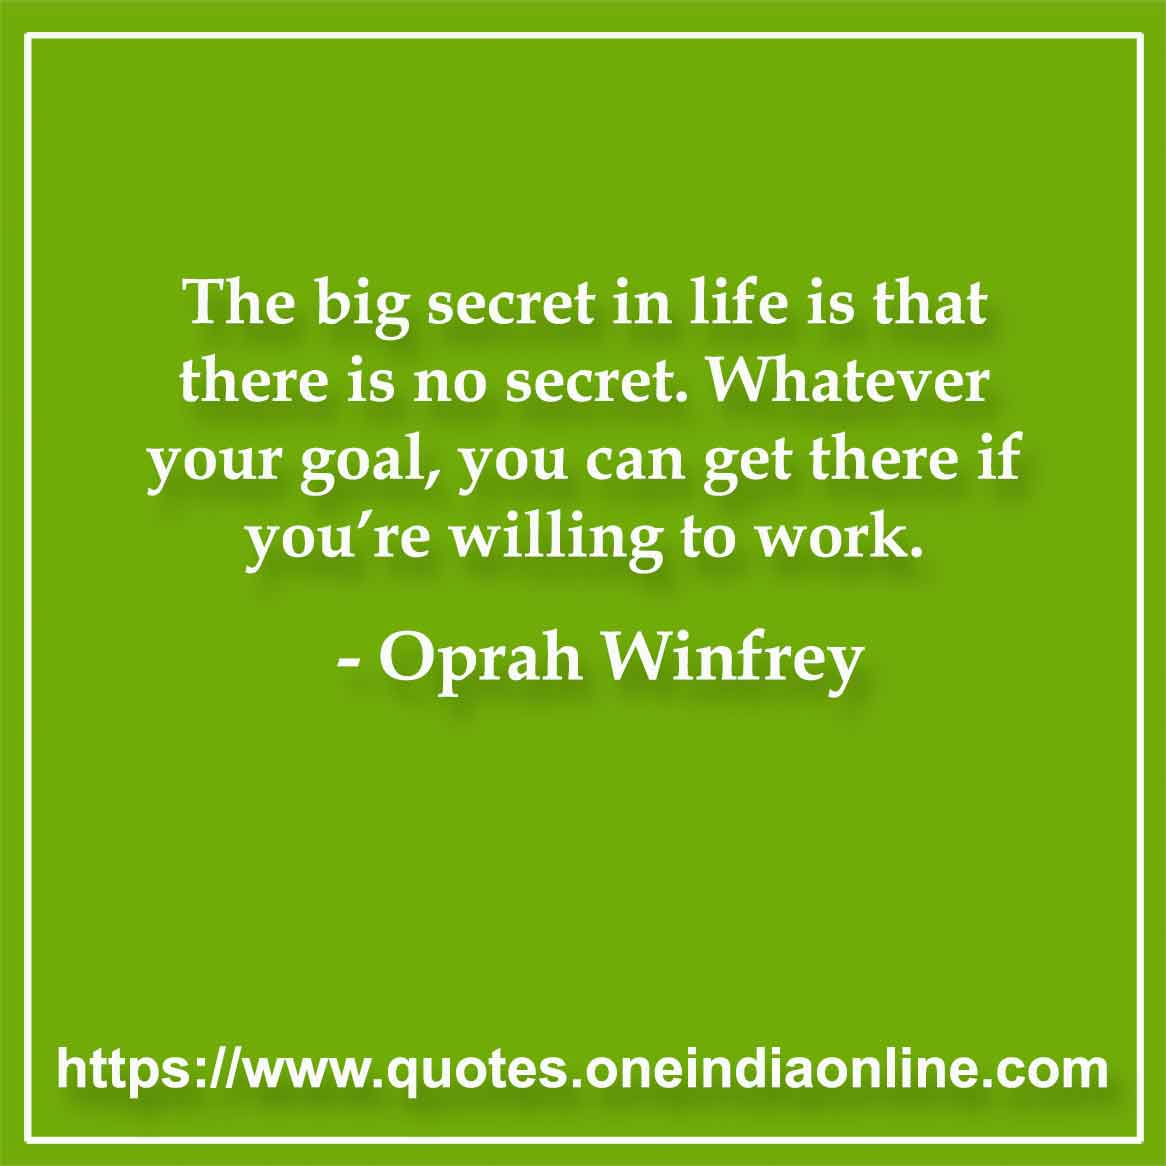 The big secret in life is that there is no secret. Whatever your goal, you can get there if you’re willing to work.

-  Oprah Winfrey